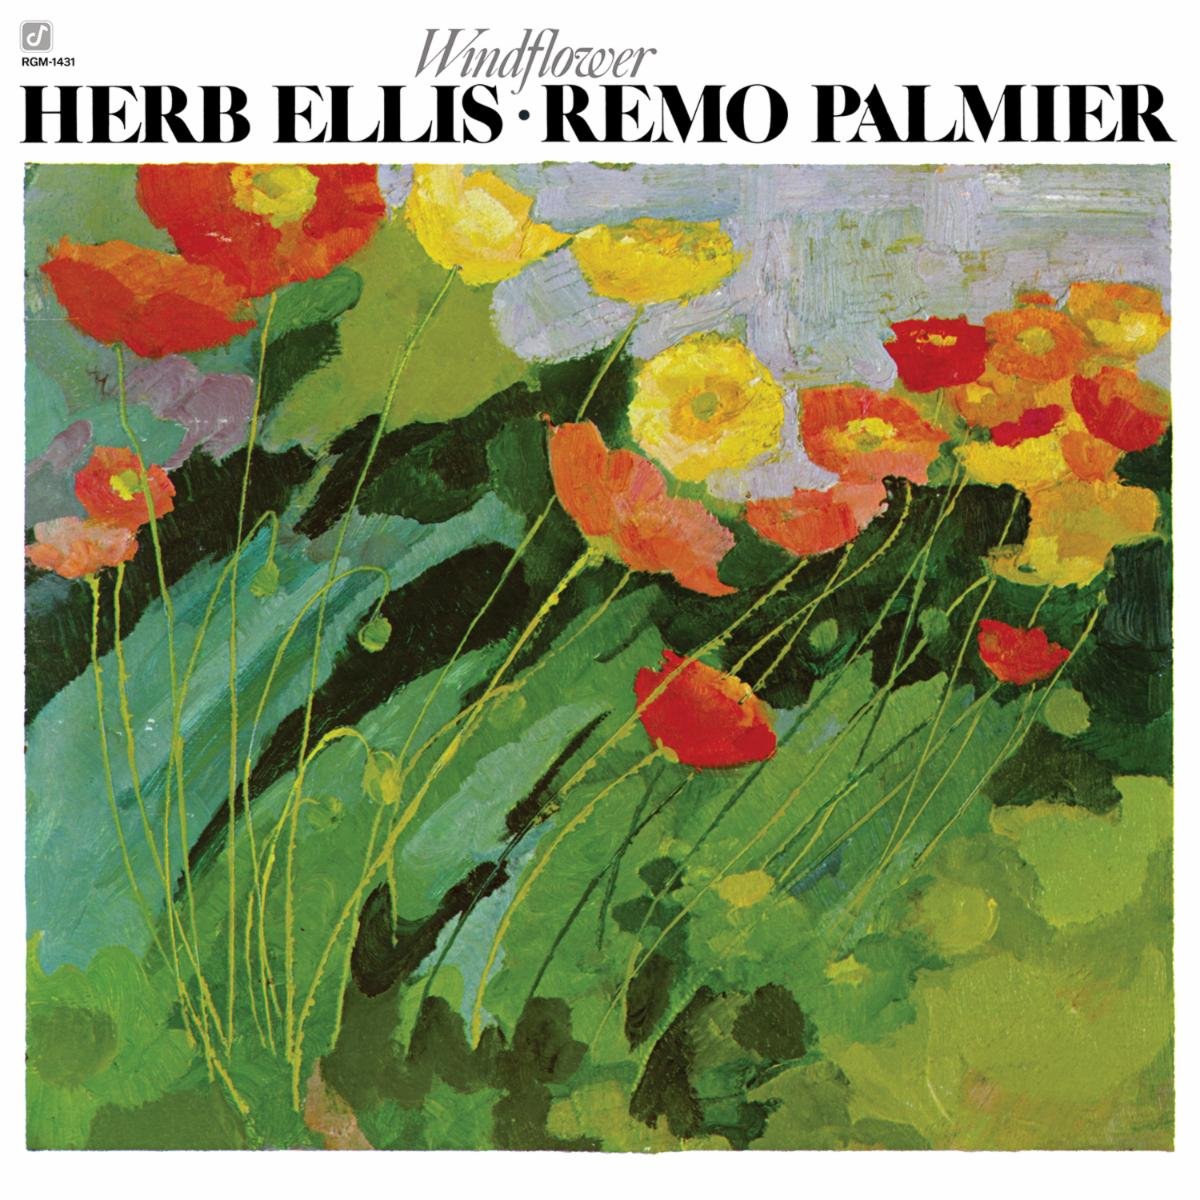 Herb Ellis and Remo Palmier